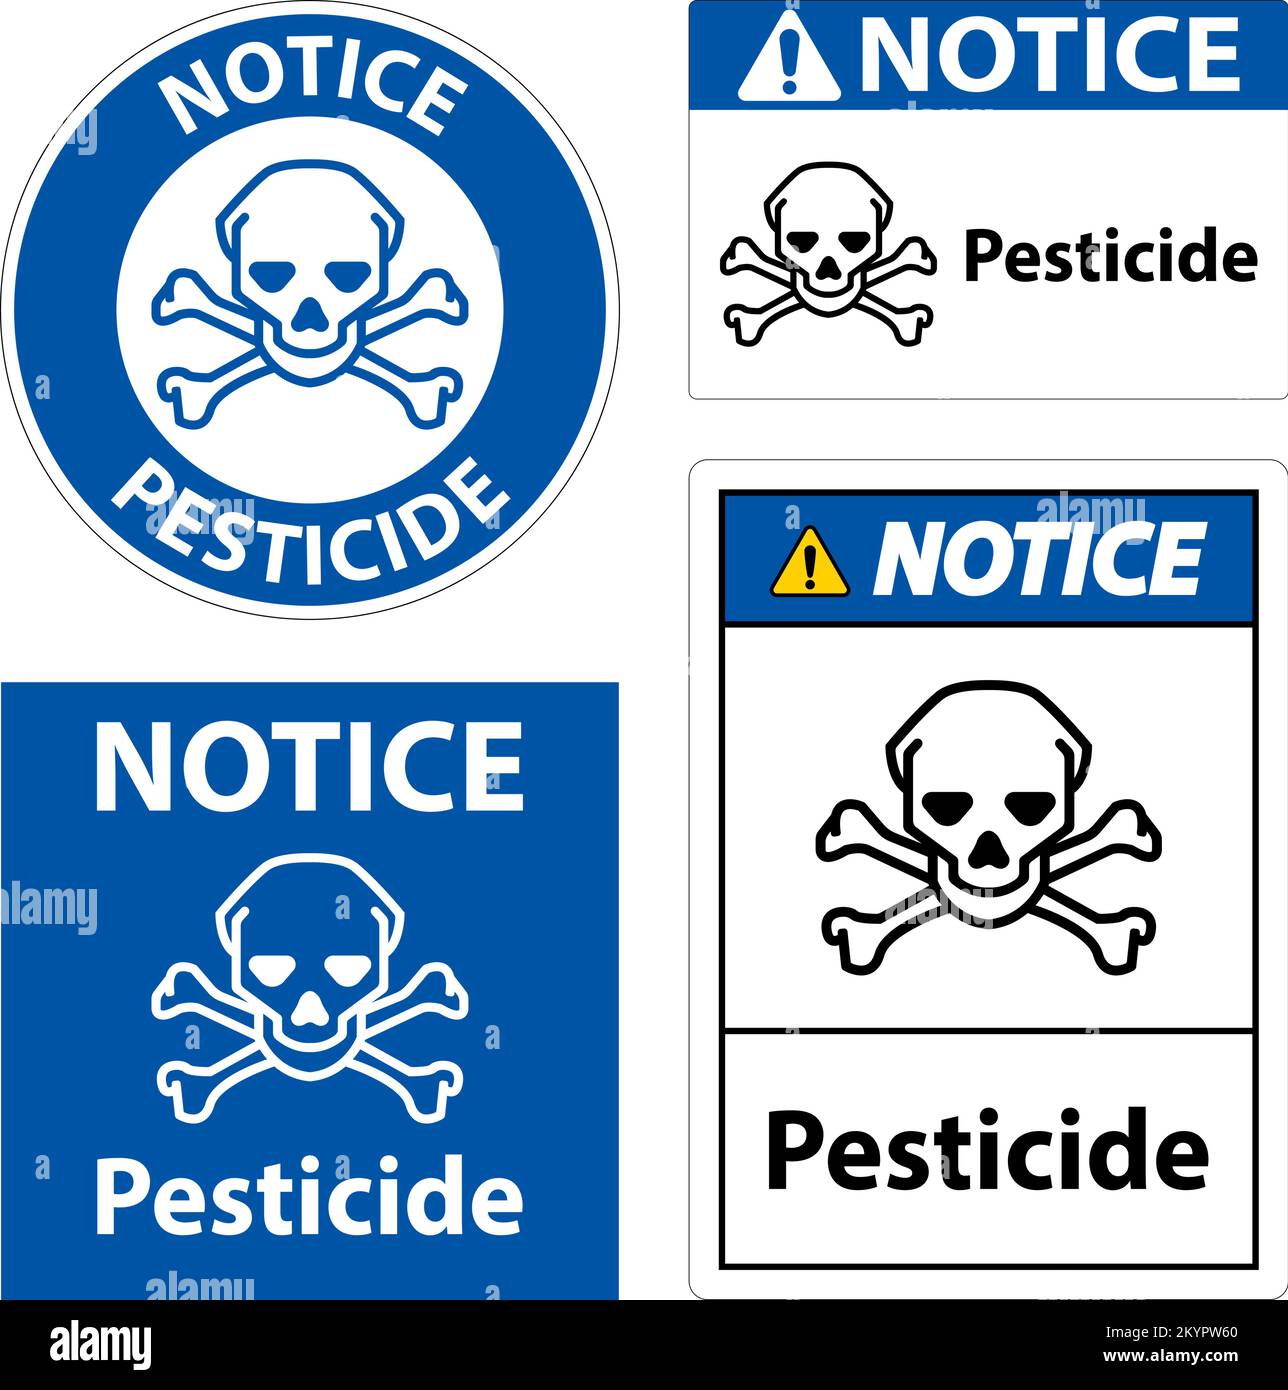 Notice Pesticide Symbol Sign On White Background Stock Vector